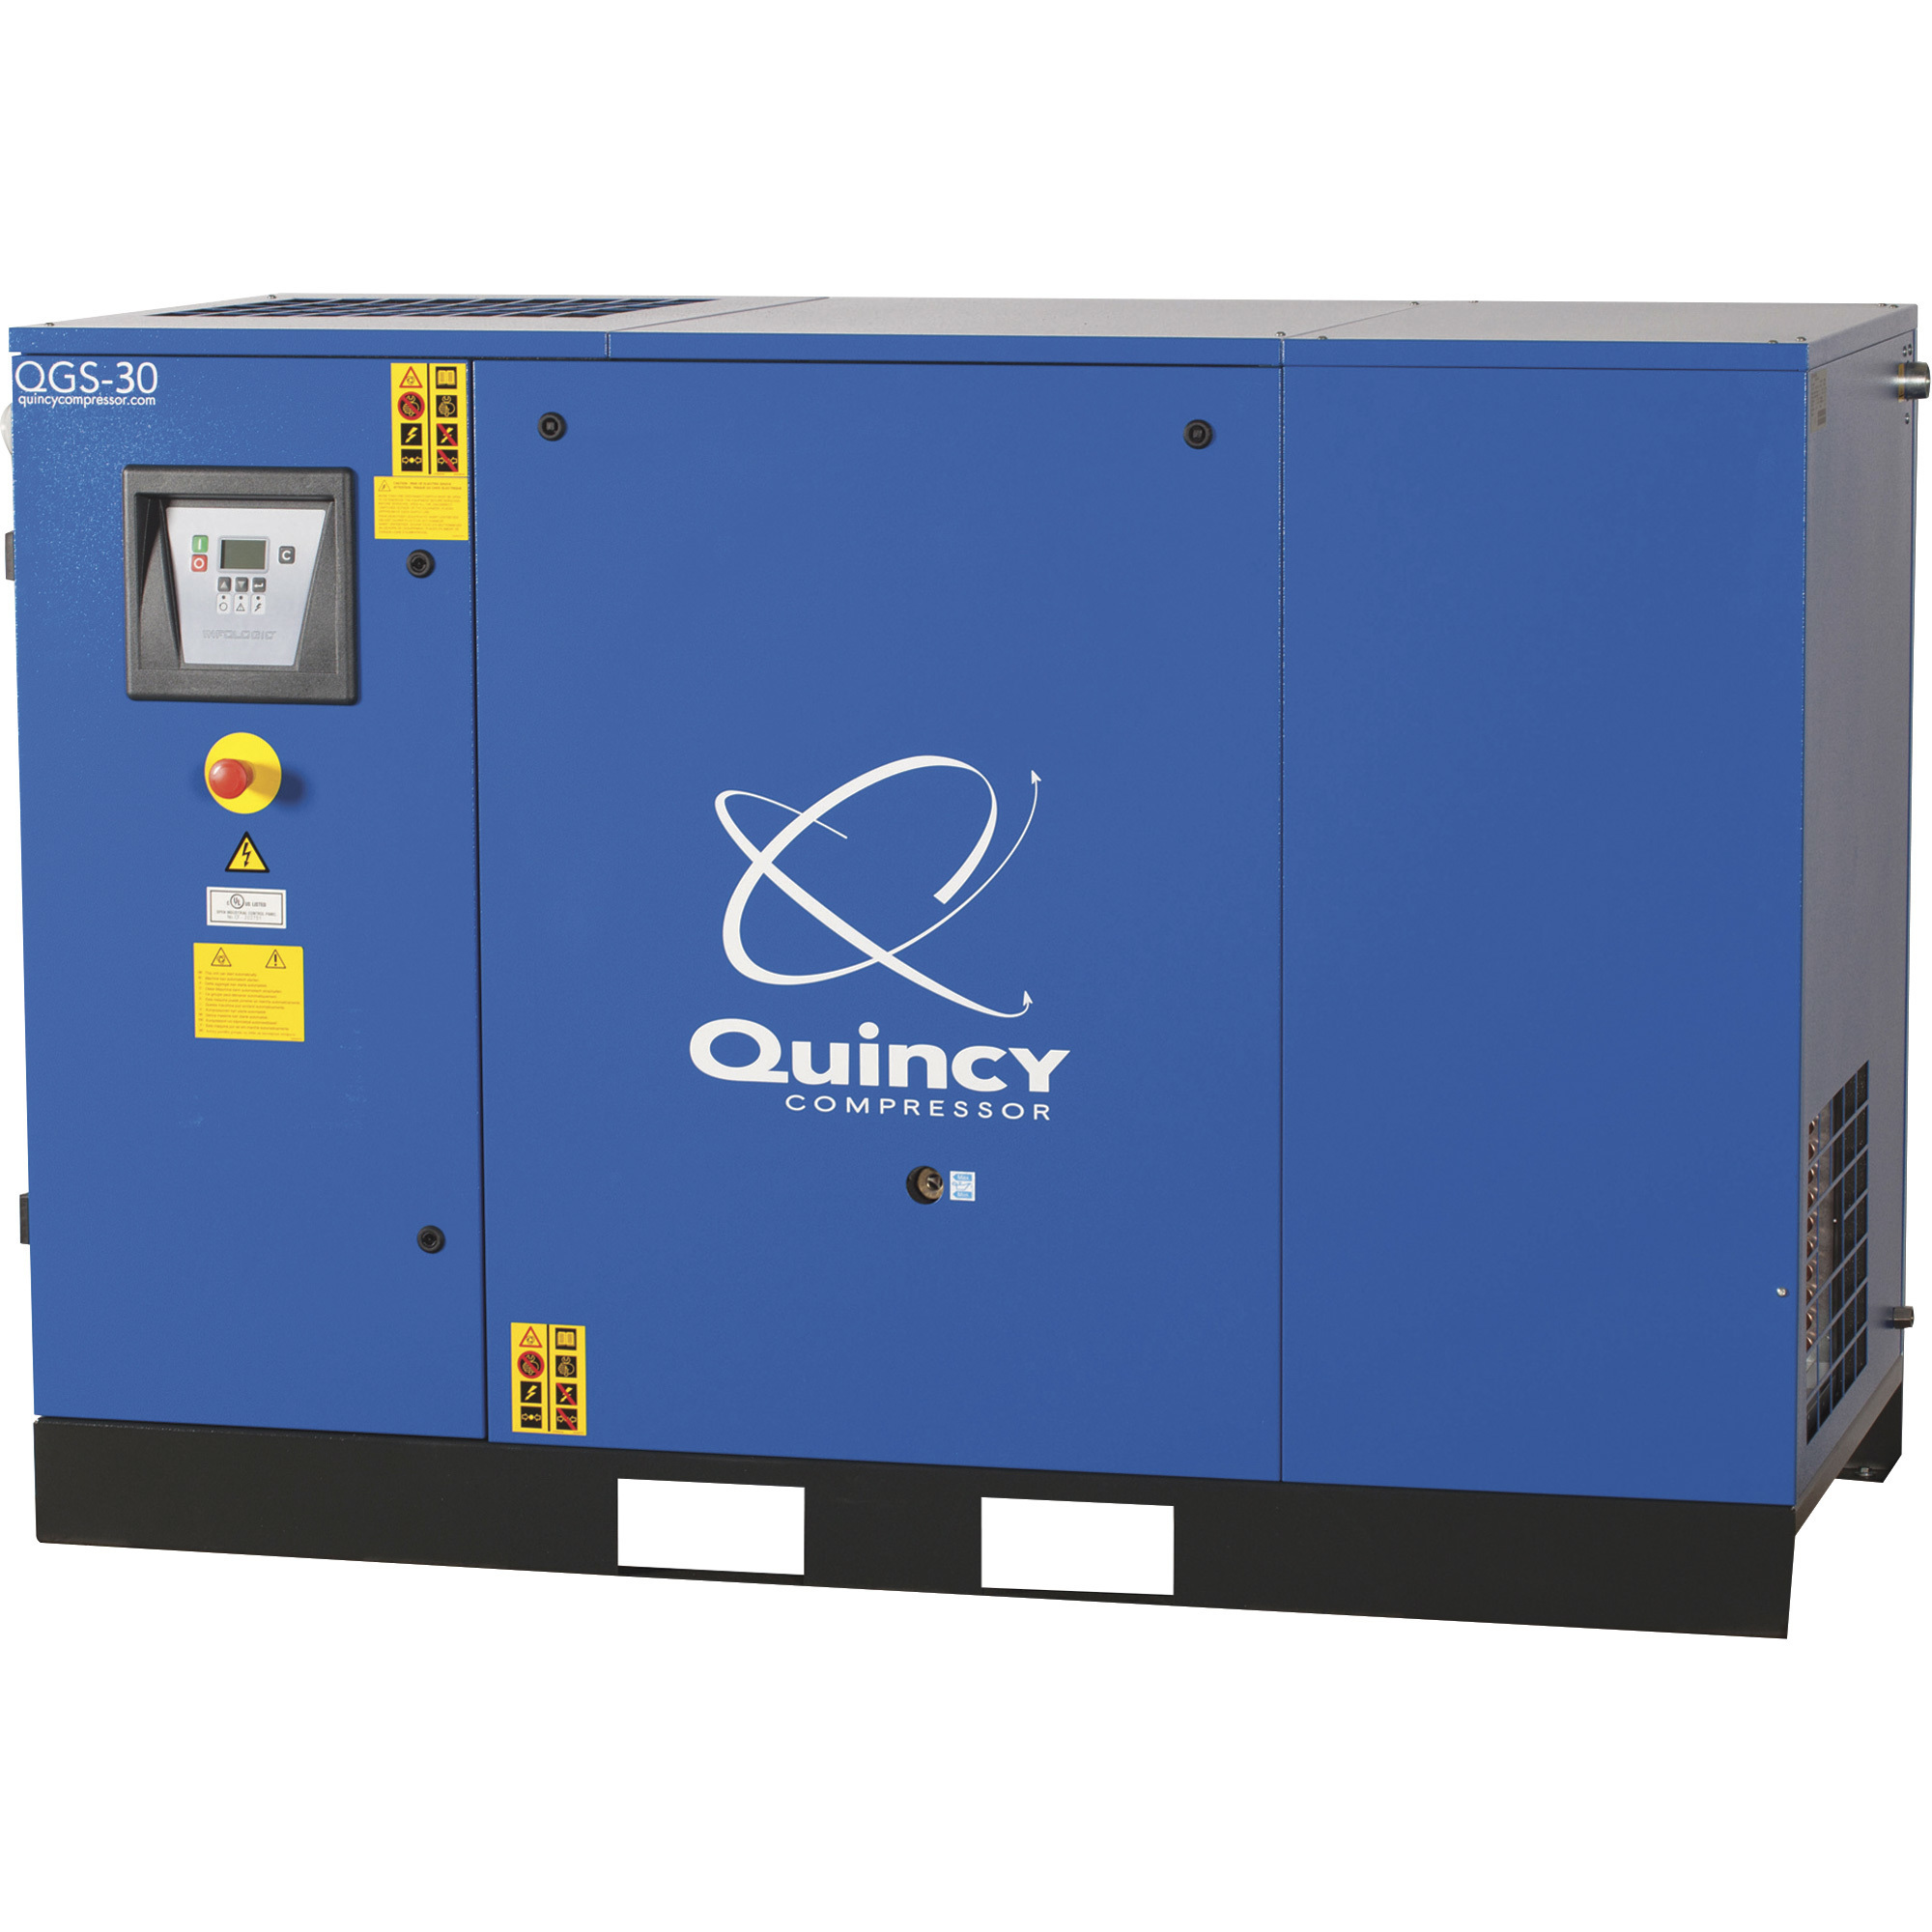 Quincy QGS Rotary Screw Air Compressor, 30 HP, 208/230-460 Volt, 3 Phase,  130 CFM, Base Mount, No Tank, Model# 4152026509